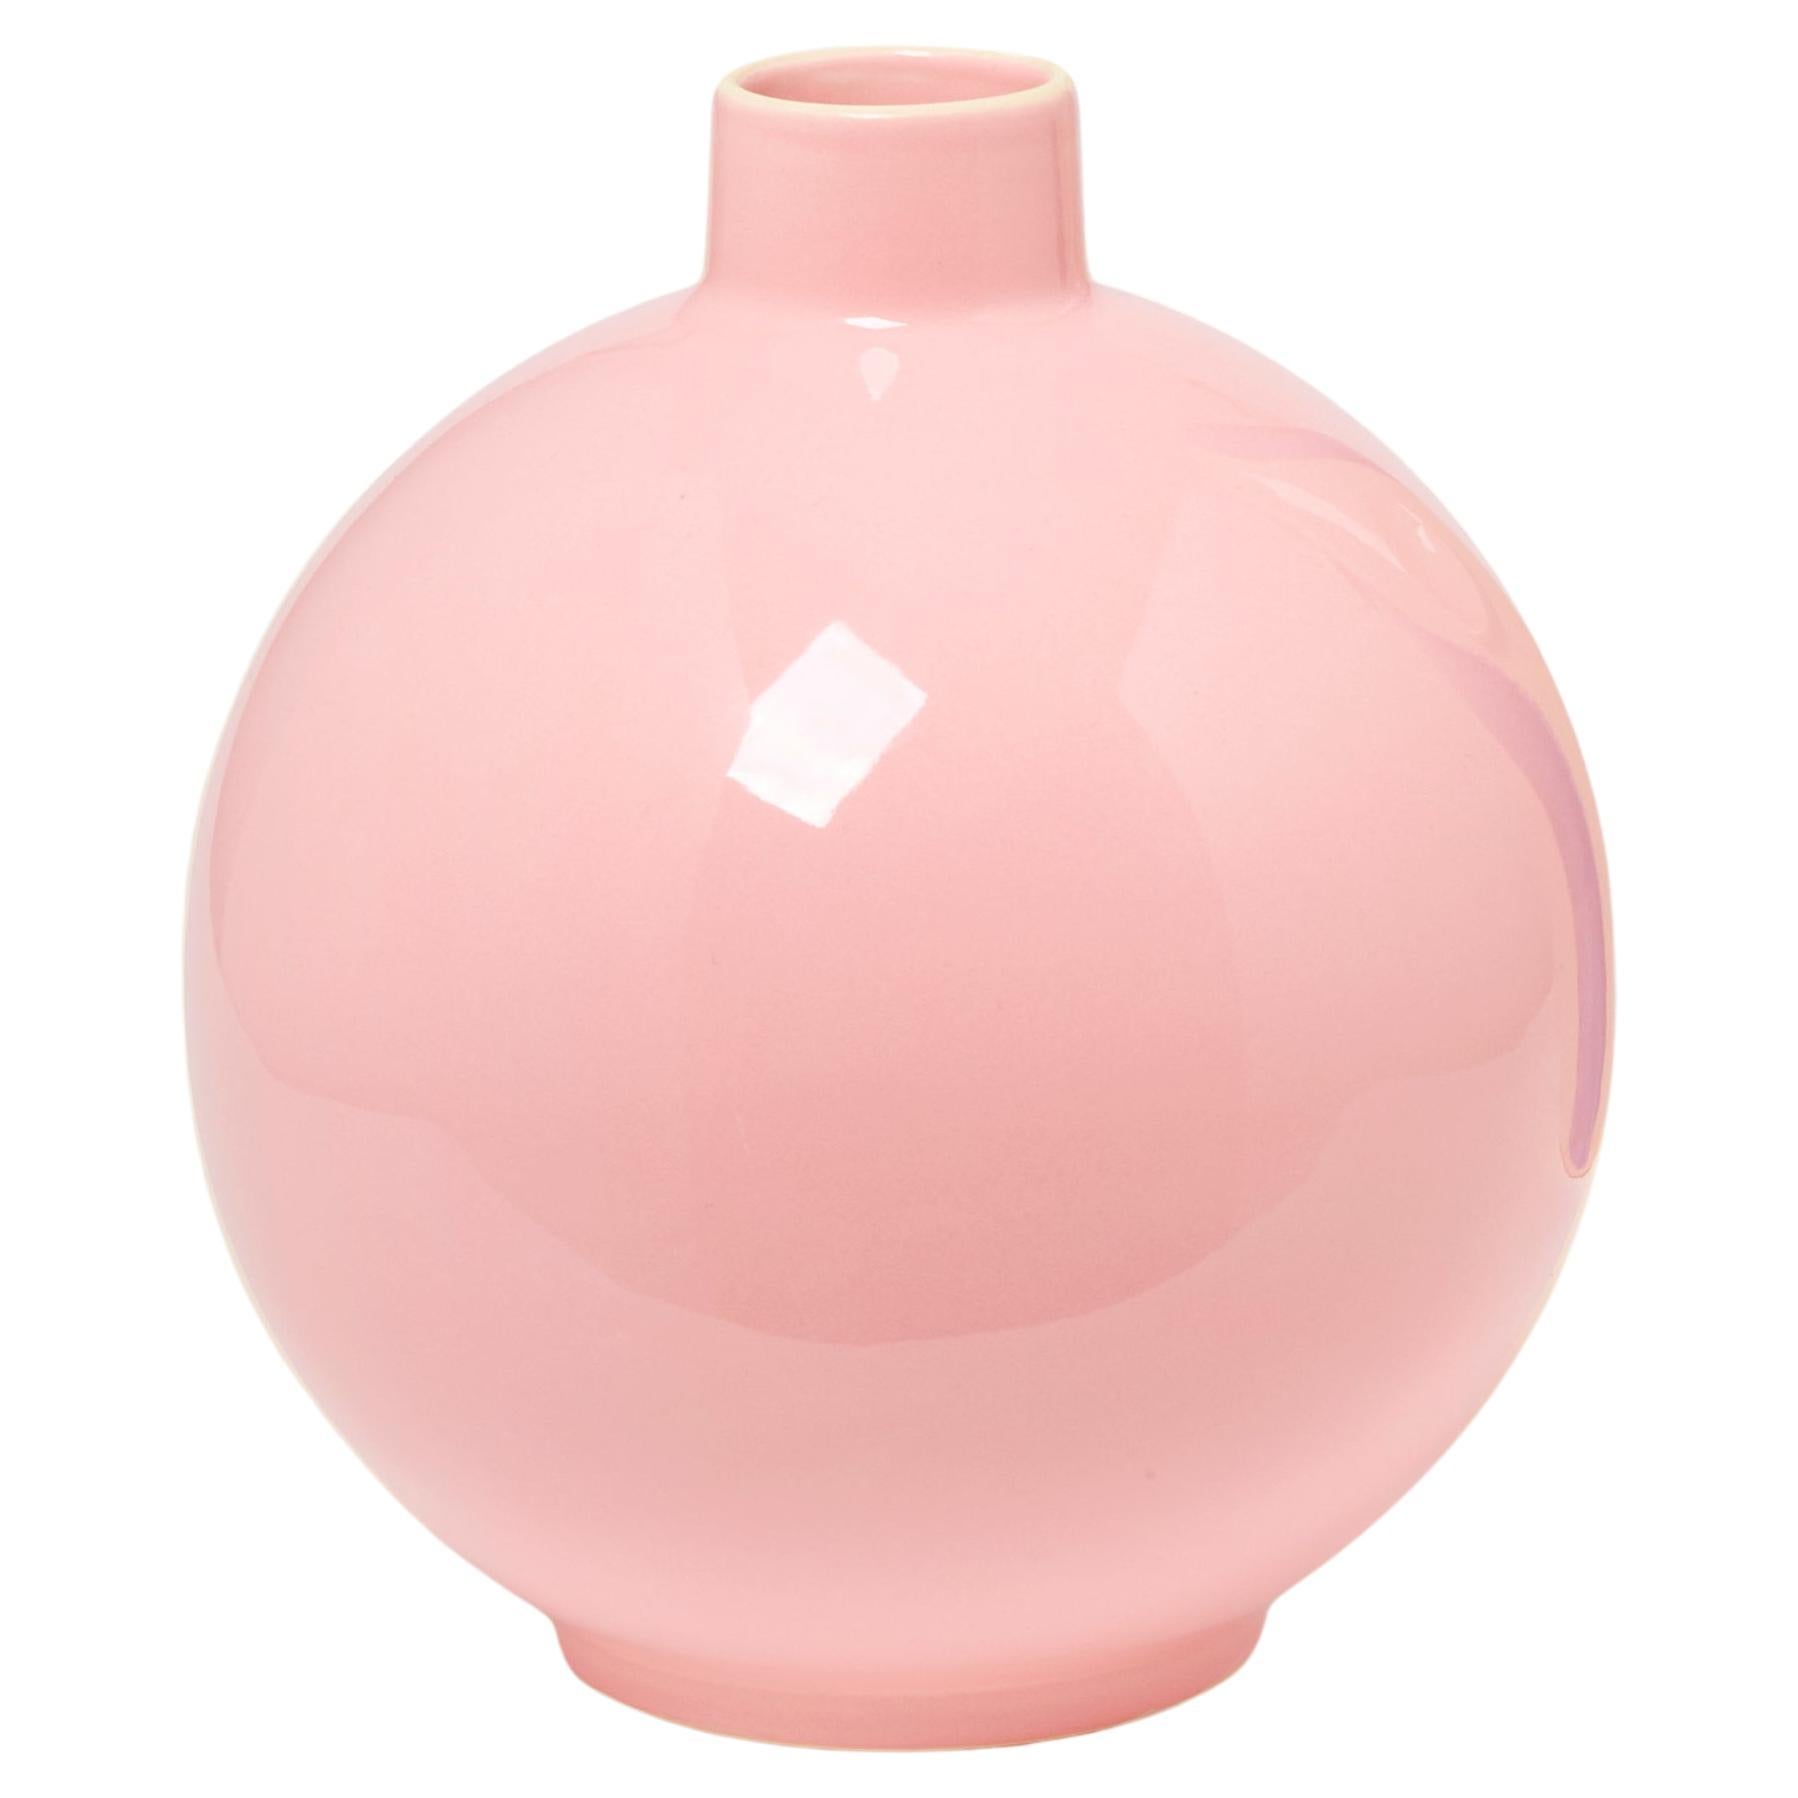 Irena Vase / Candy Pink by Malwina Konopacka For Sale